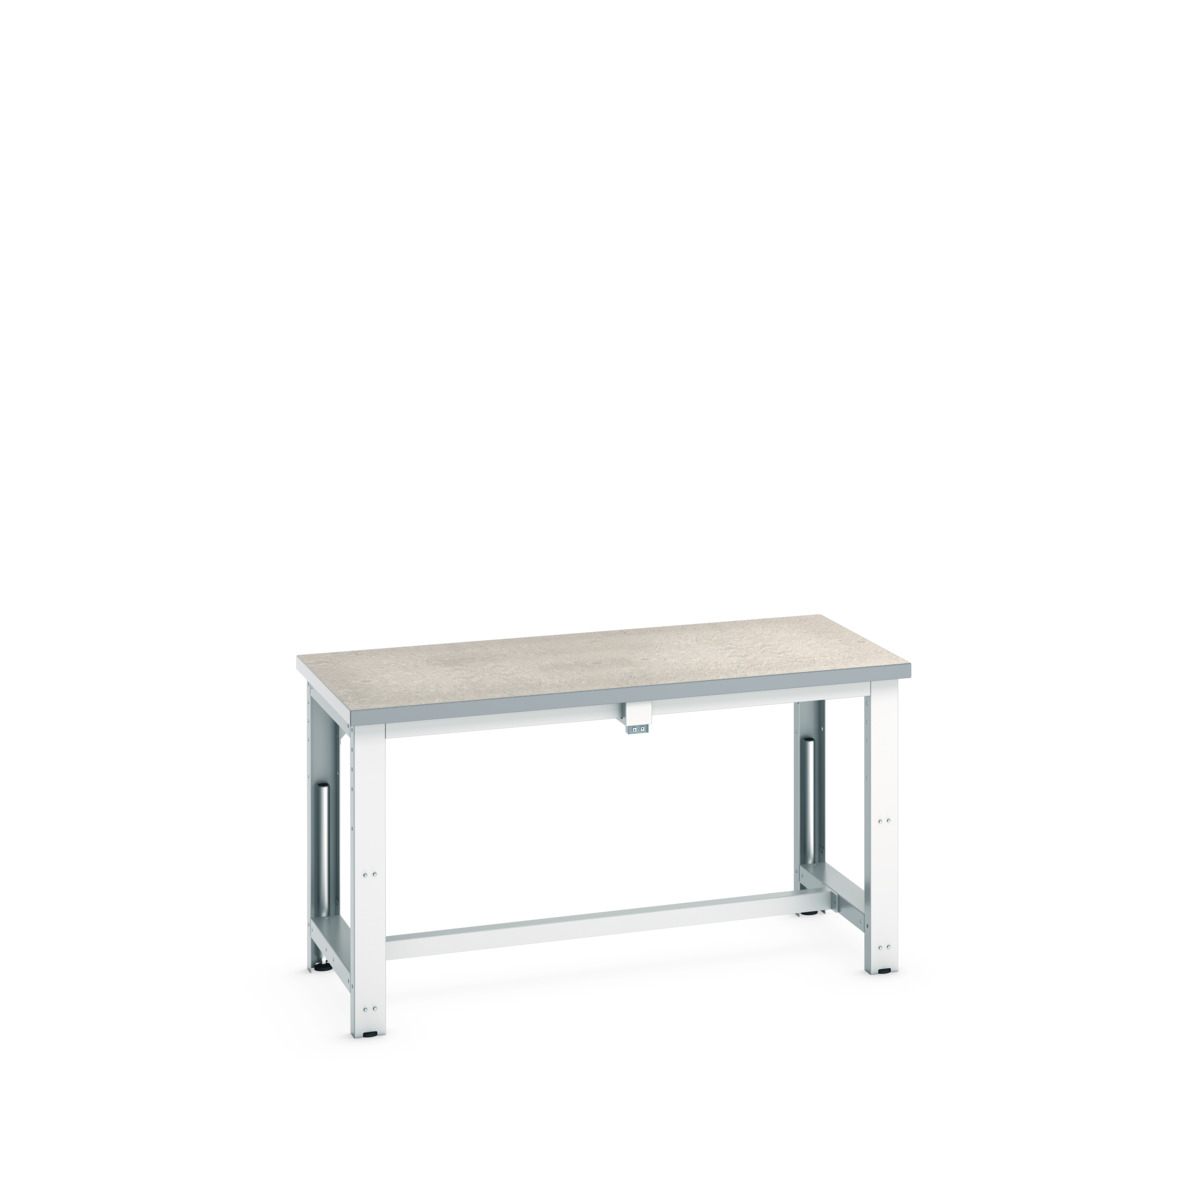 41003567. - cubio stepless adjustable height bench